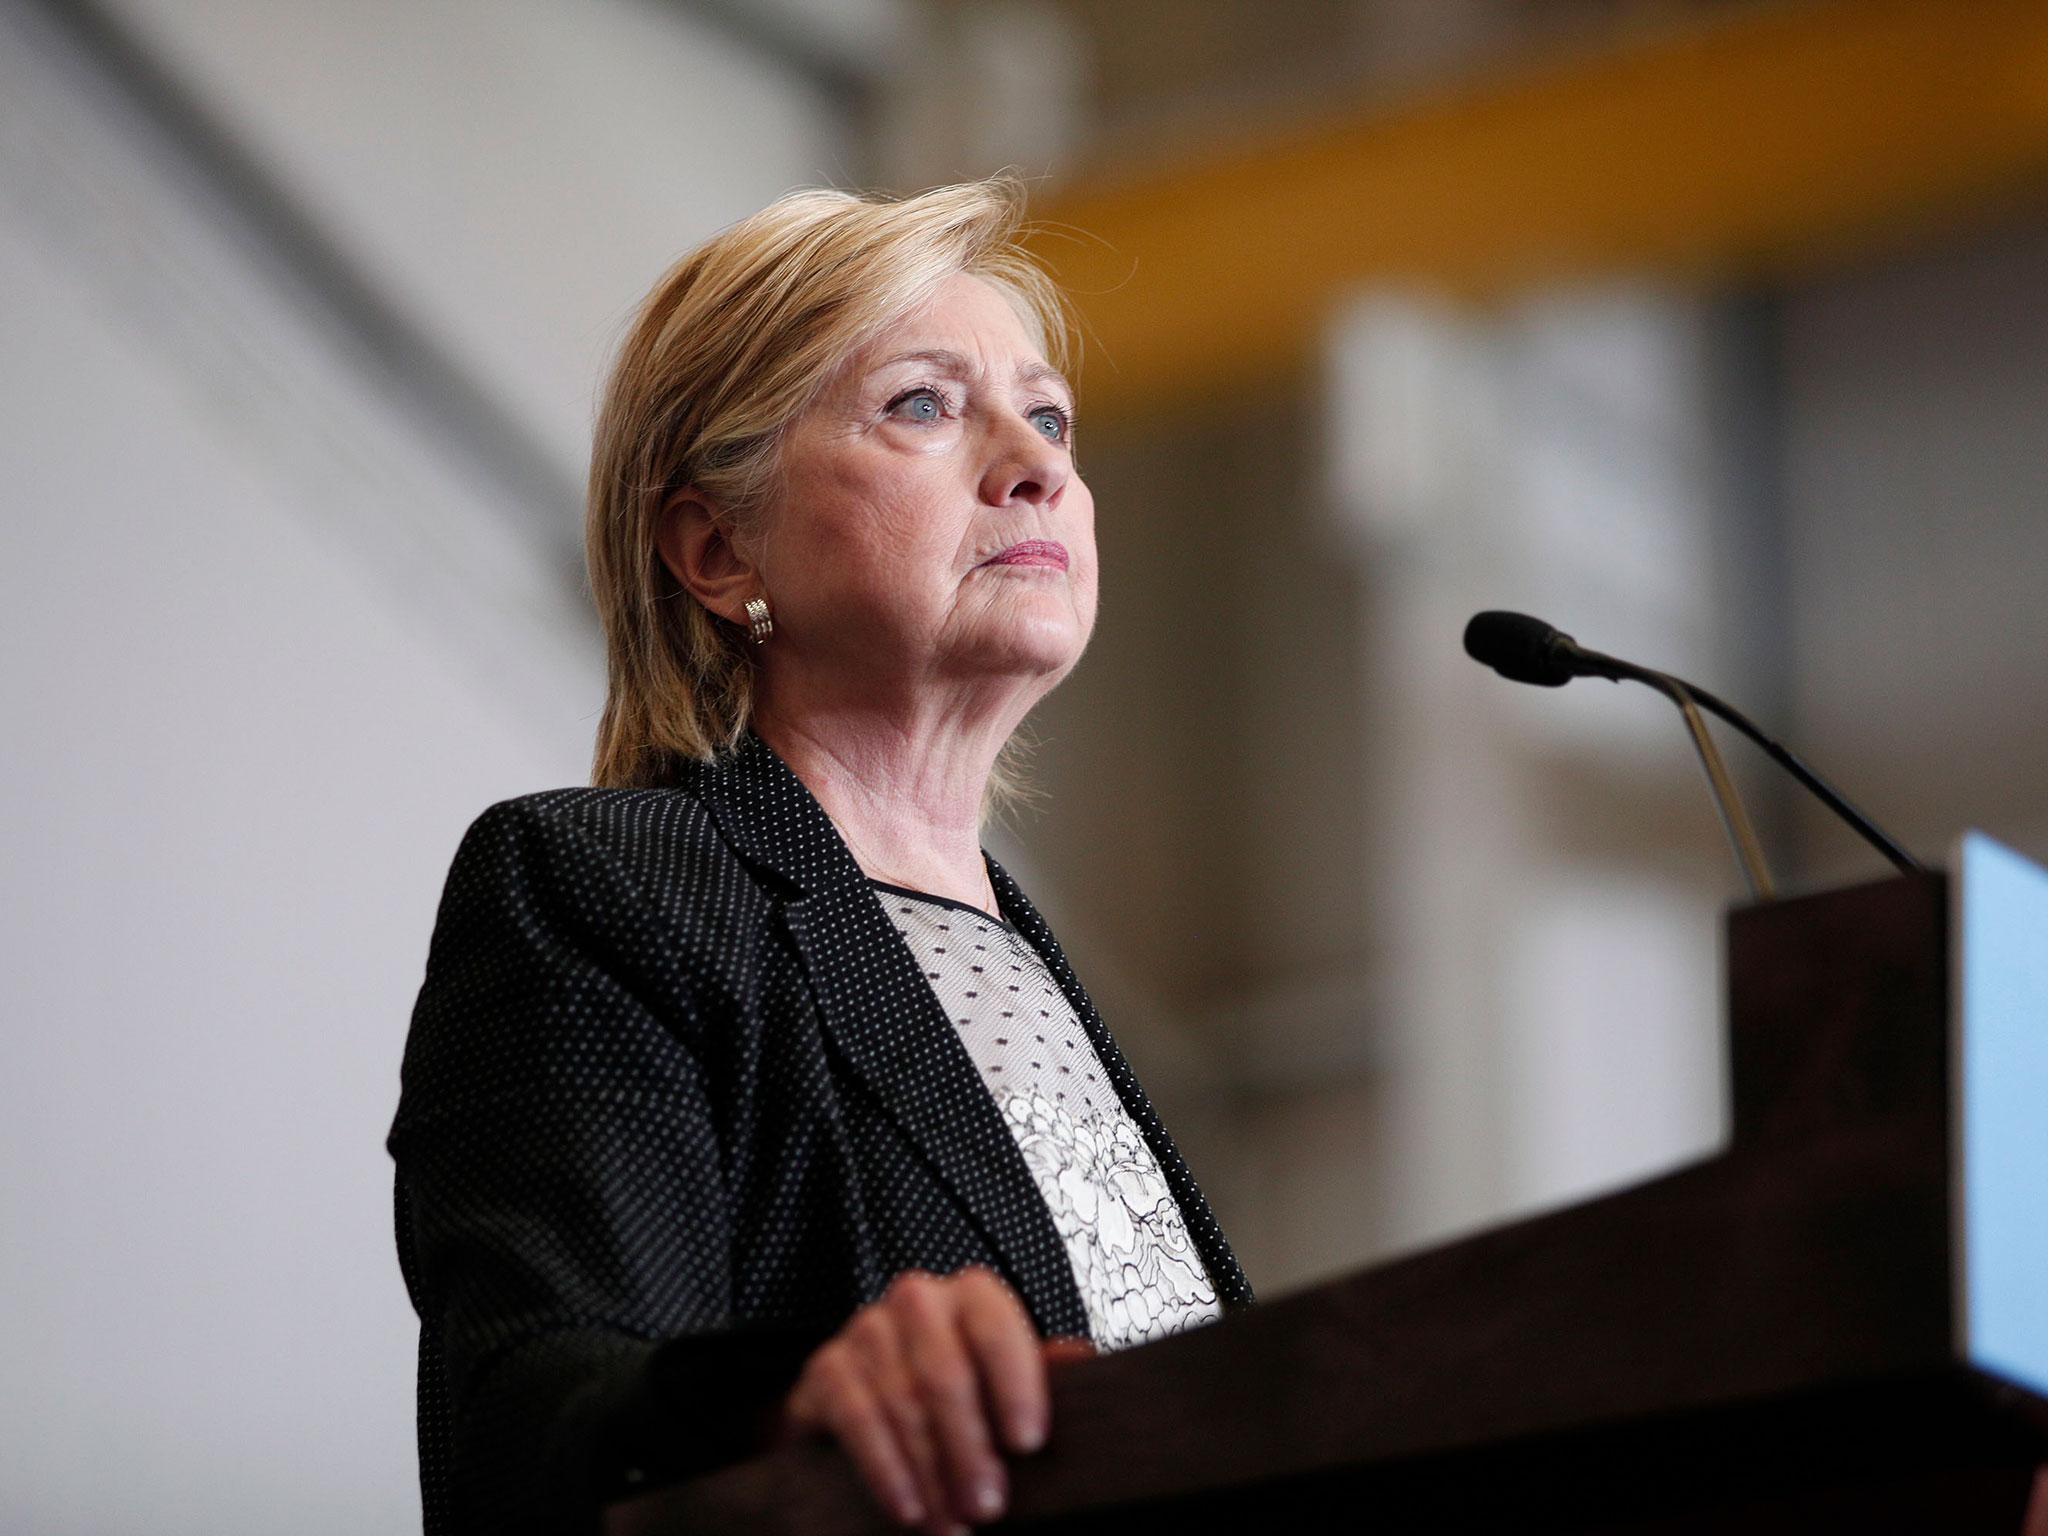 Hillary Clinton blamed Russian hackers for a leak of Democratic National Committee emails